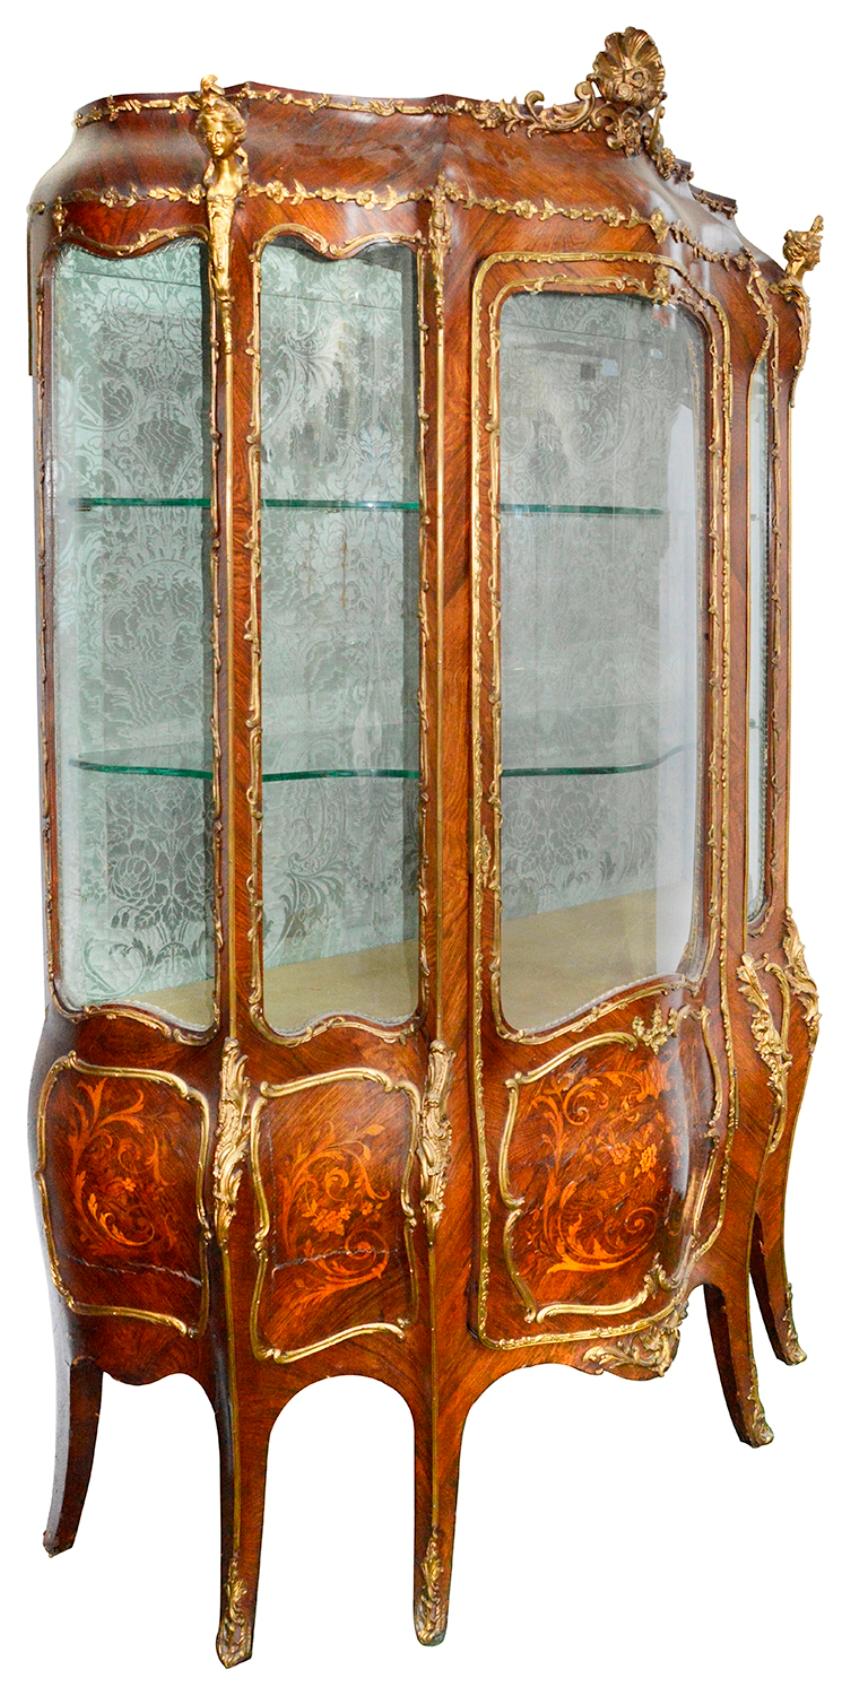 A good quality late 19th century French Marquetry inlaid bombe fronted Louis XVI style vitrine, having gilded ormolu monopodia mounts and mouldings. A single door opening to reveal glass shelves within, raised on our swept elegant legs.